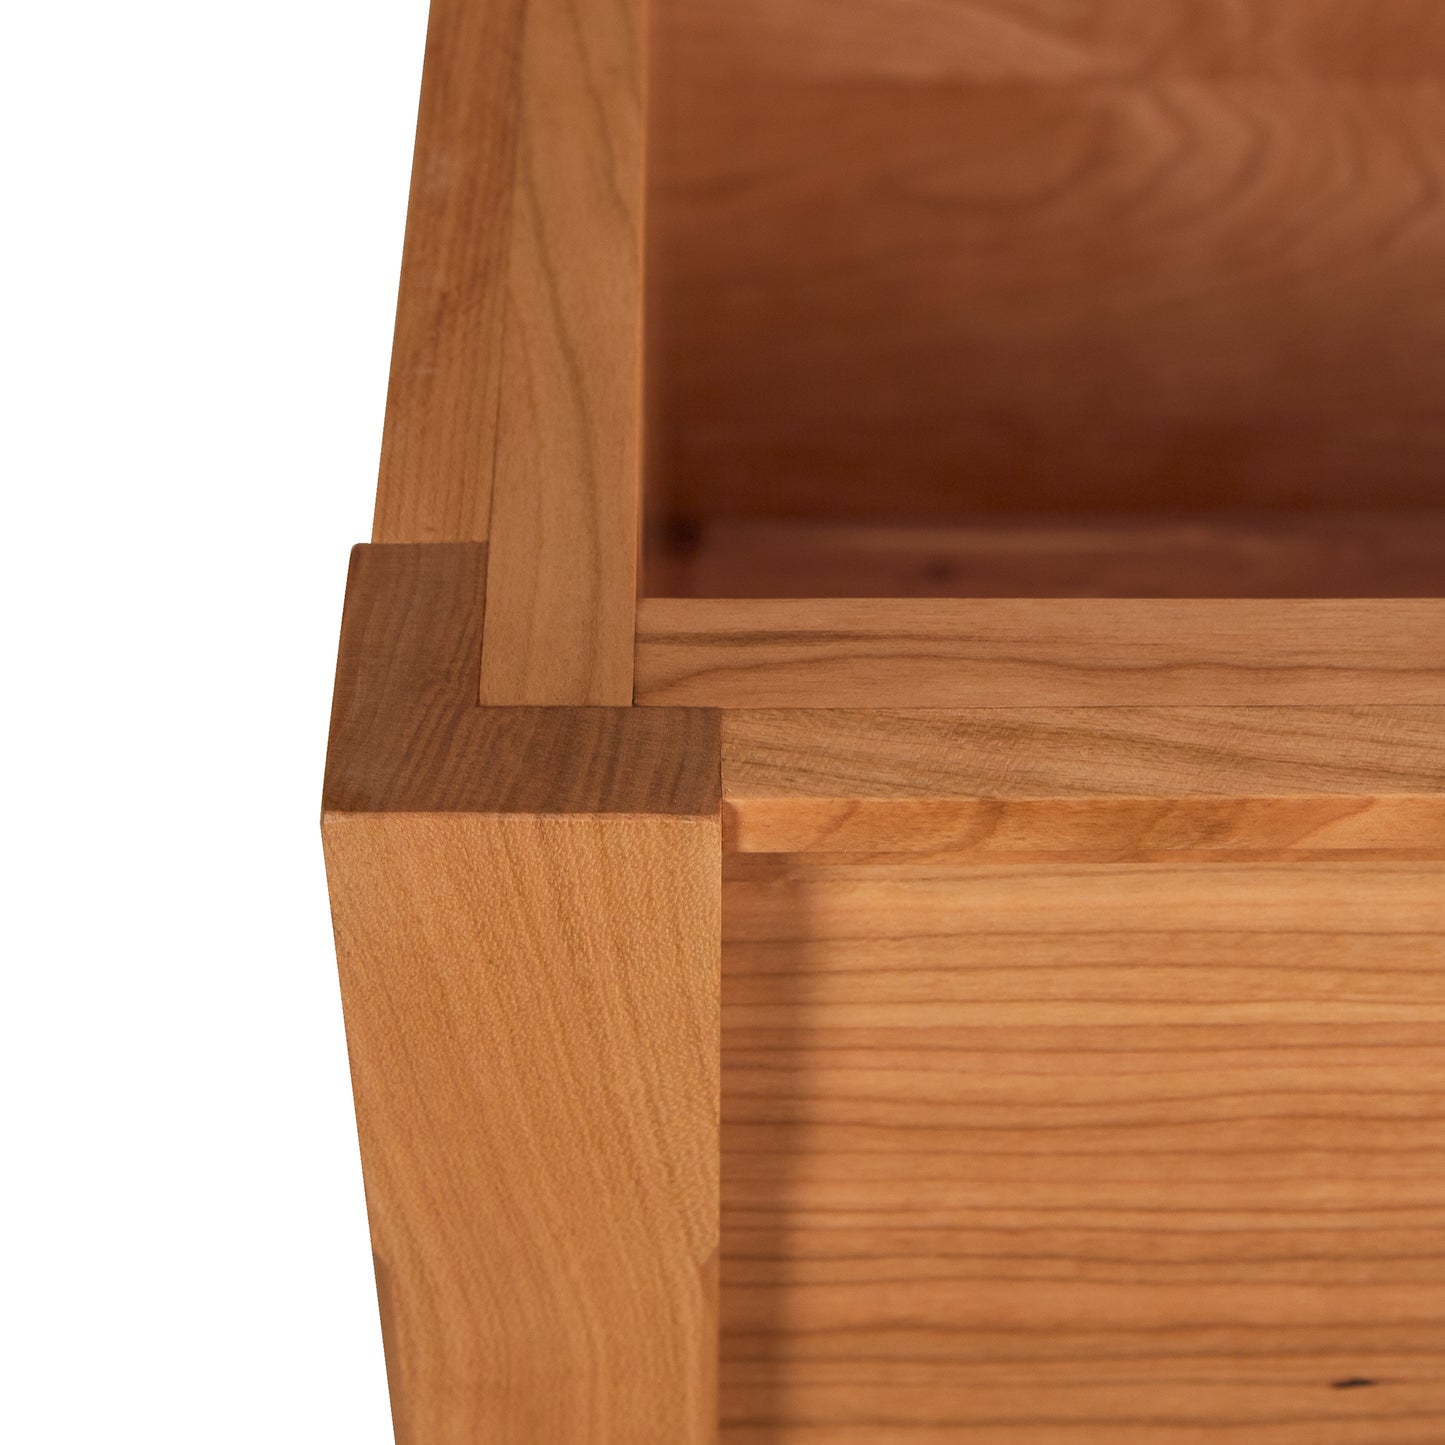 Close-up view of the corner of a Maple Corner Woodworks Vermont Shaker Blanket Chest, highlighting the wood grain and precision joinery.